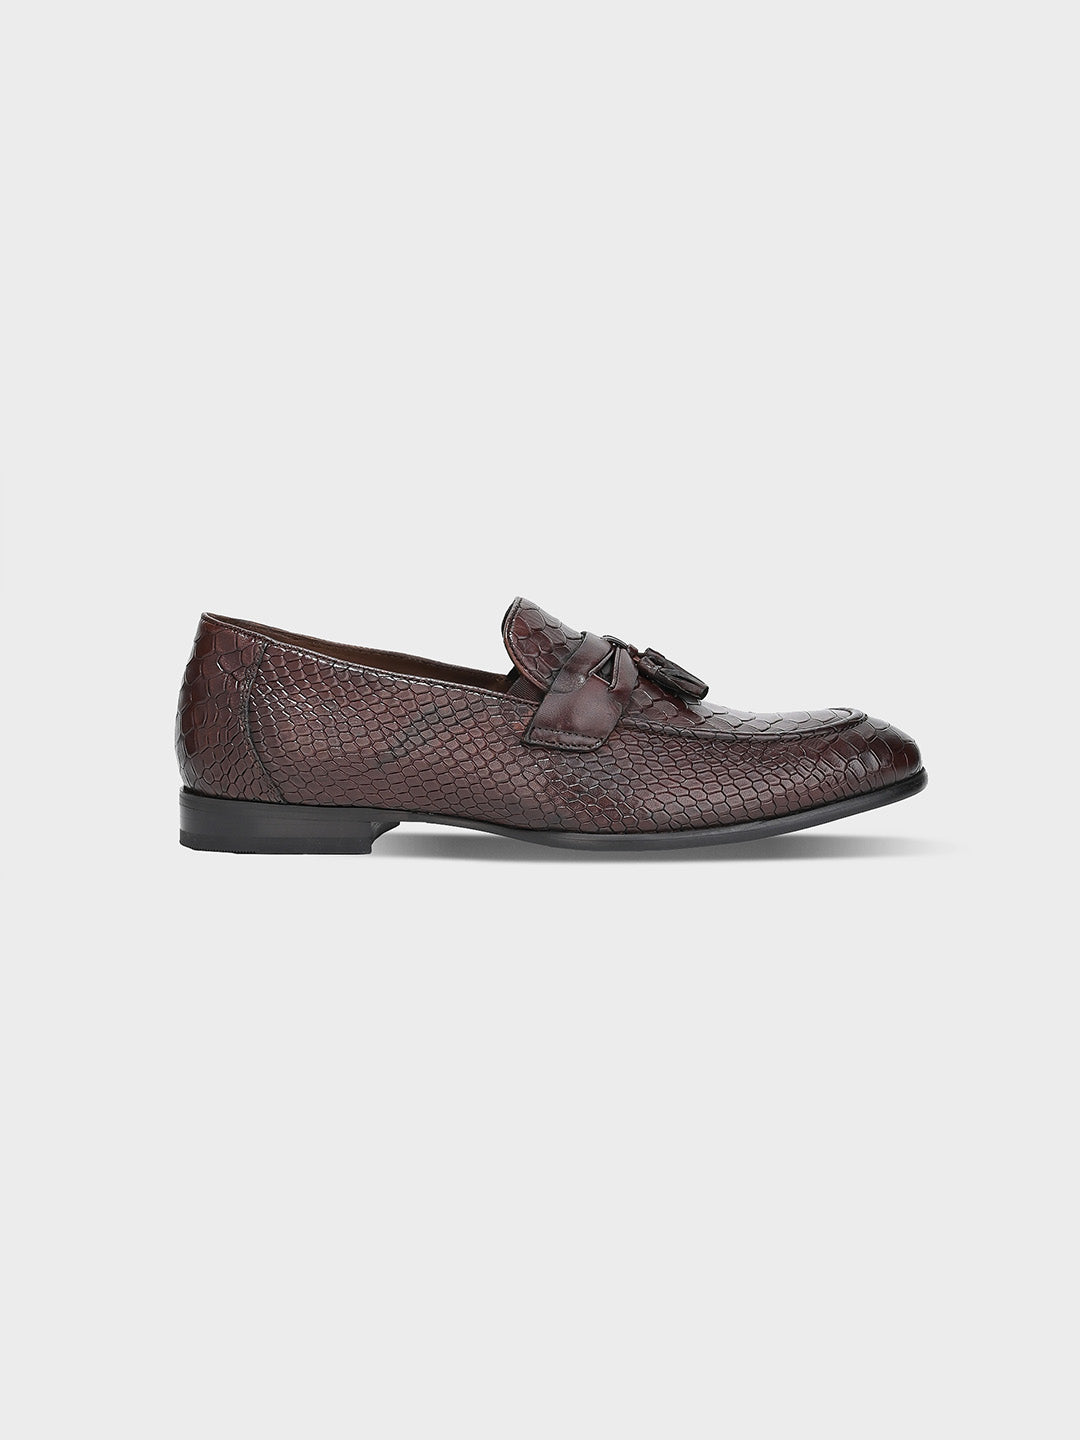 Classic Brown Leather Men's Tassel Slip-On Shoes – One8 Select